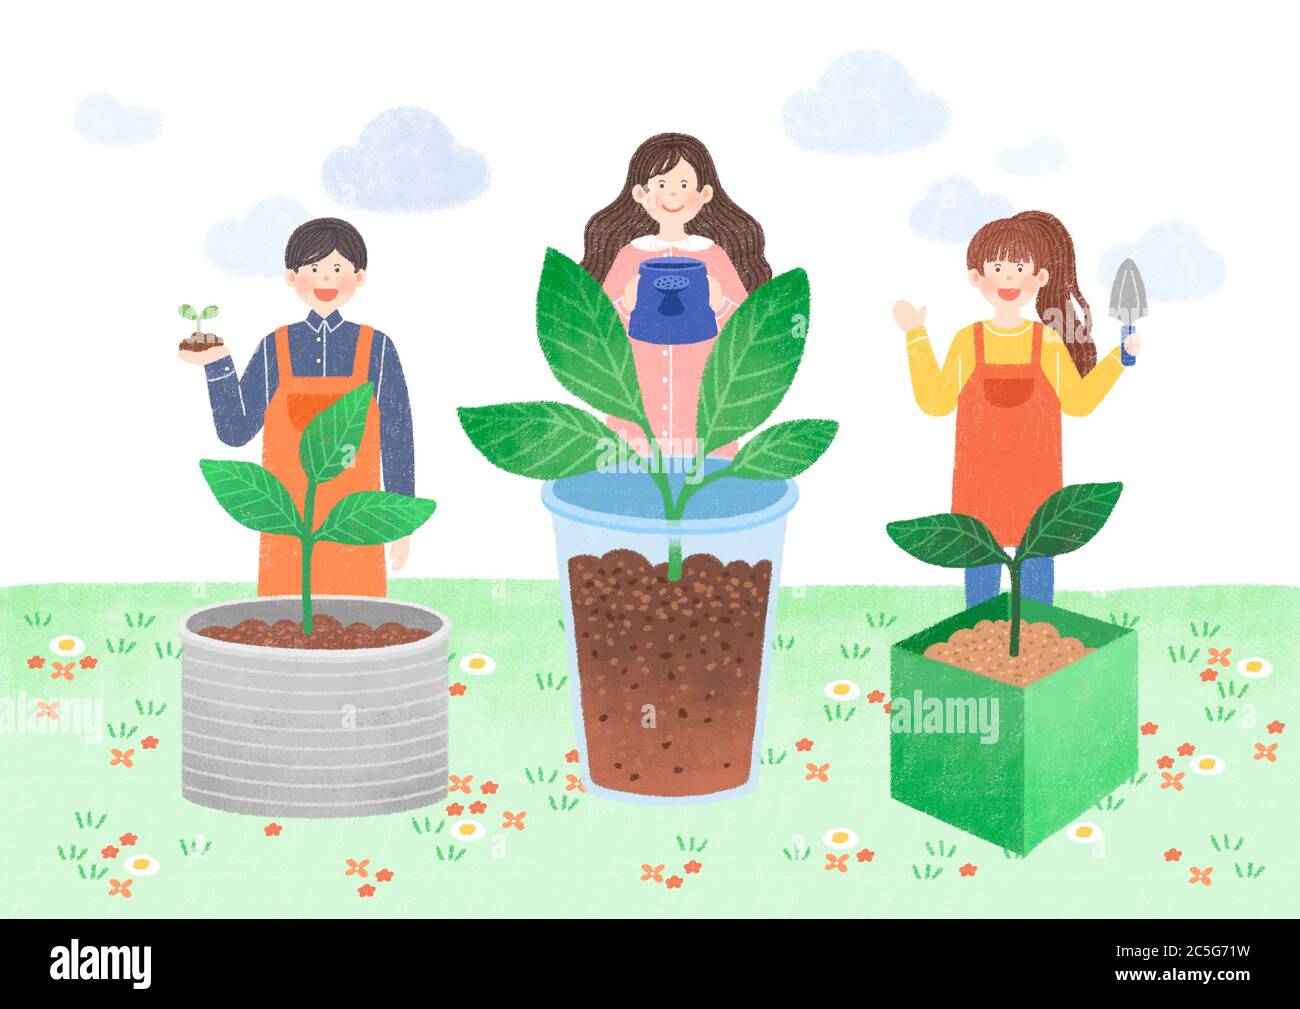 Ecology design concept. tree planting, recycling illustration 005 Stock Vector